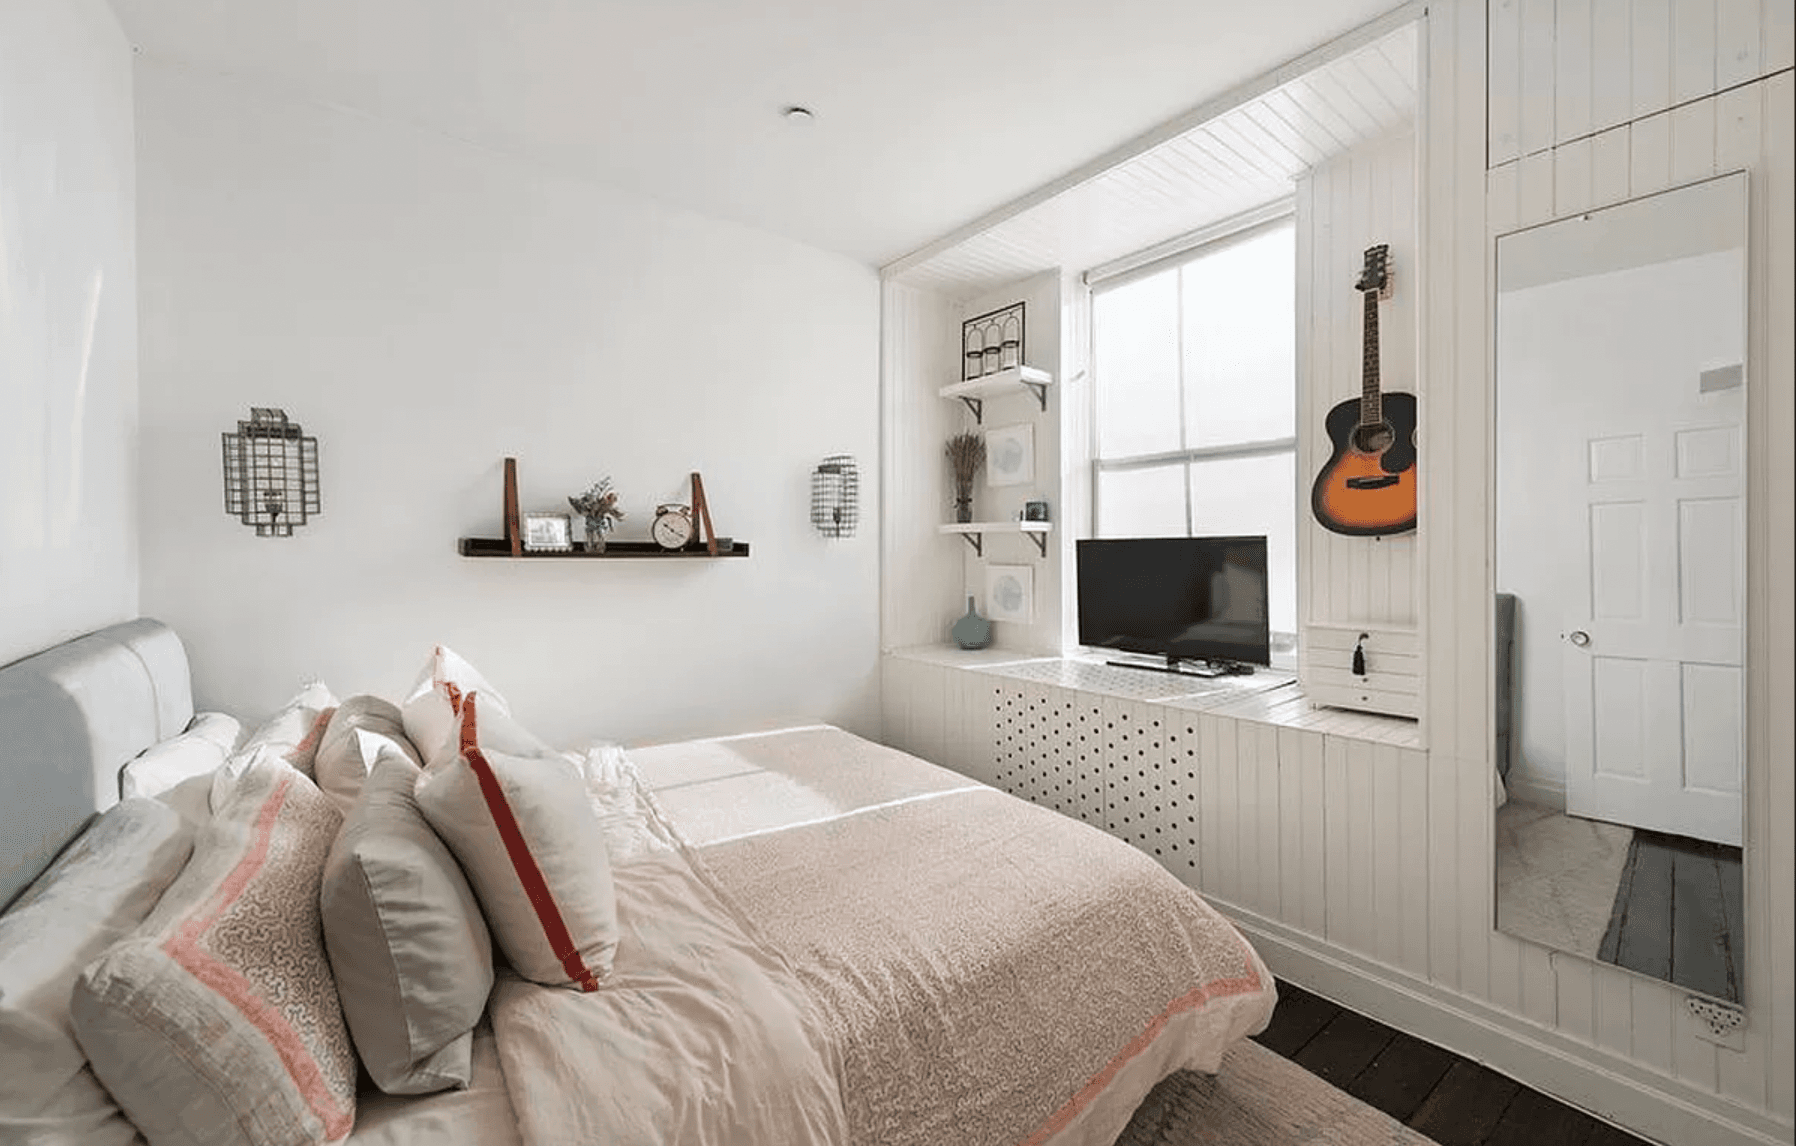 Located in the Historic South Street Seaport on what was once famed as the Street of Ships, unit 3F is the loft you've been hoping would become available !